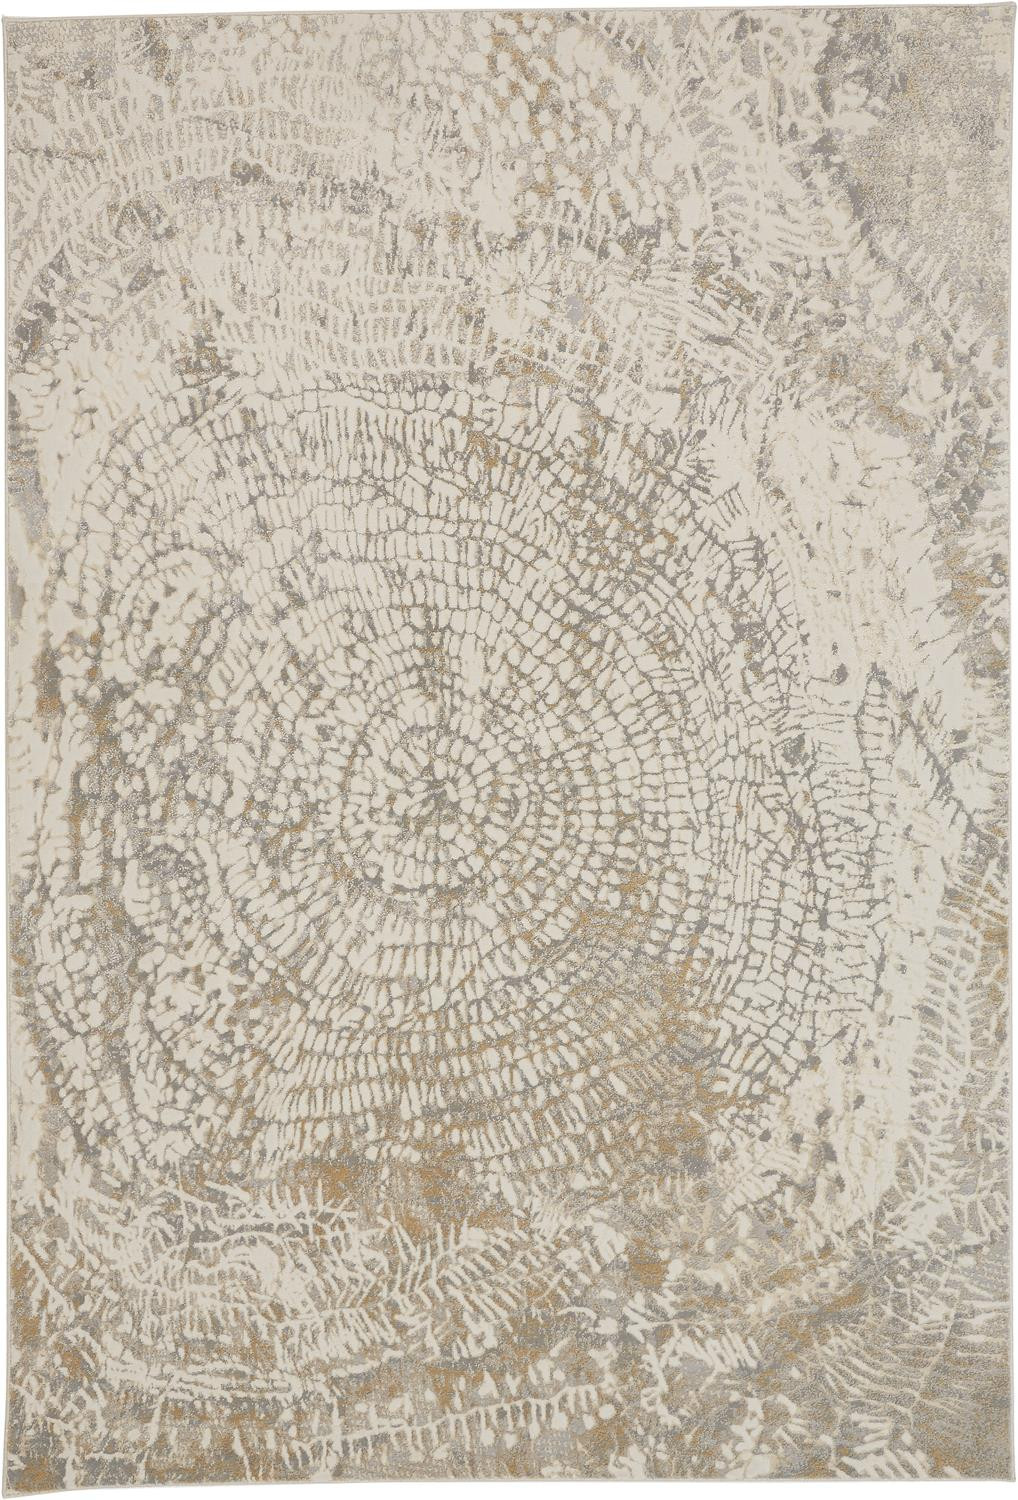 5' X 8' Ivory Tan And Gray Abstract Area Rug-514696-1